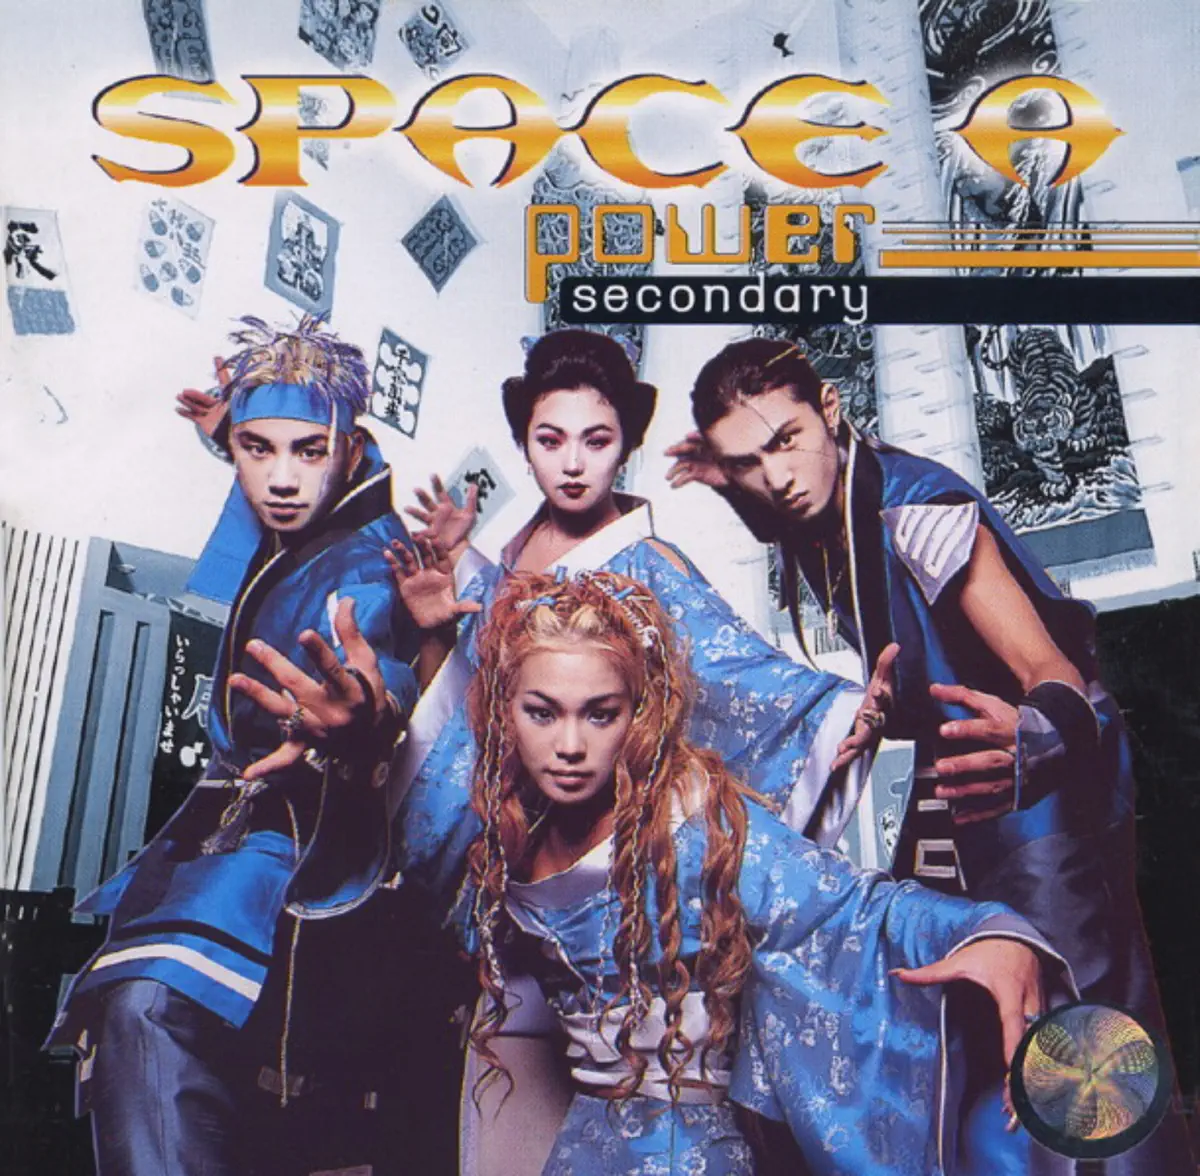 Space A - Power Secondary (2000) [iTunes Plus AAC M4A]-新房子